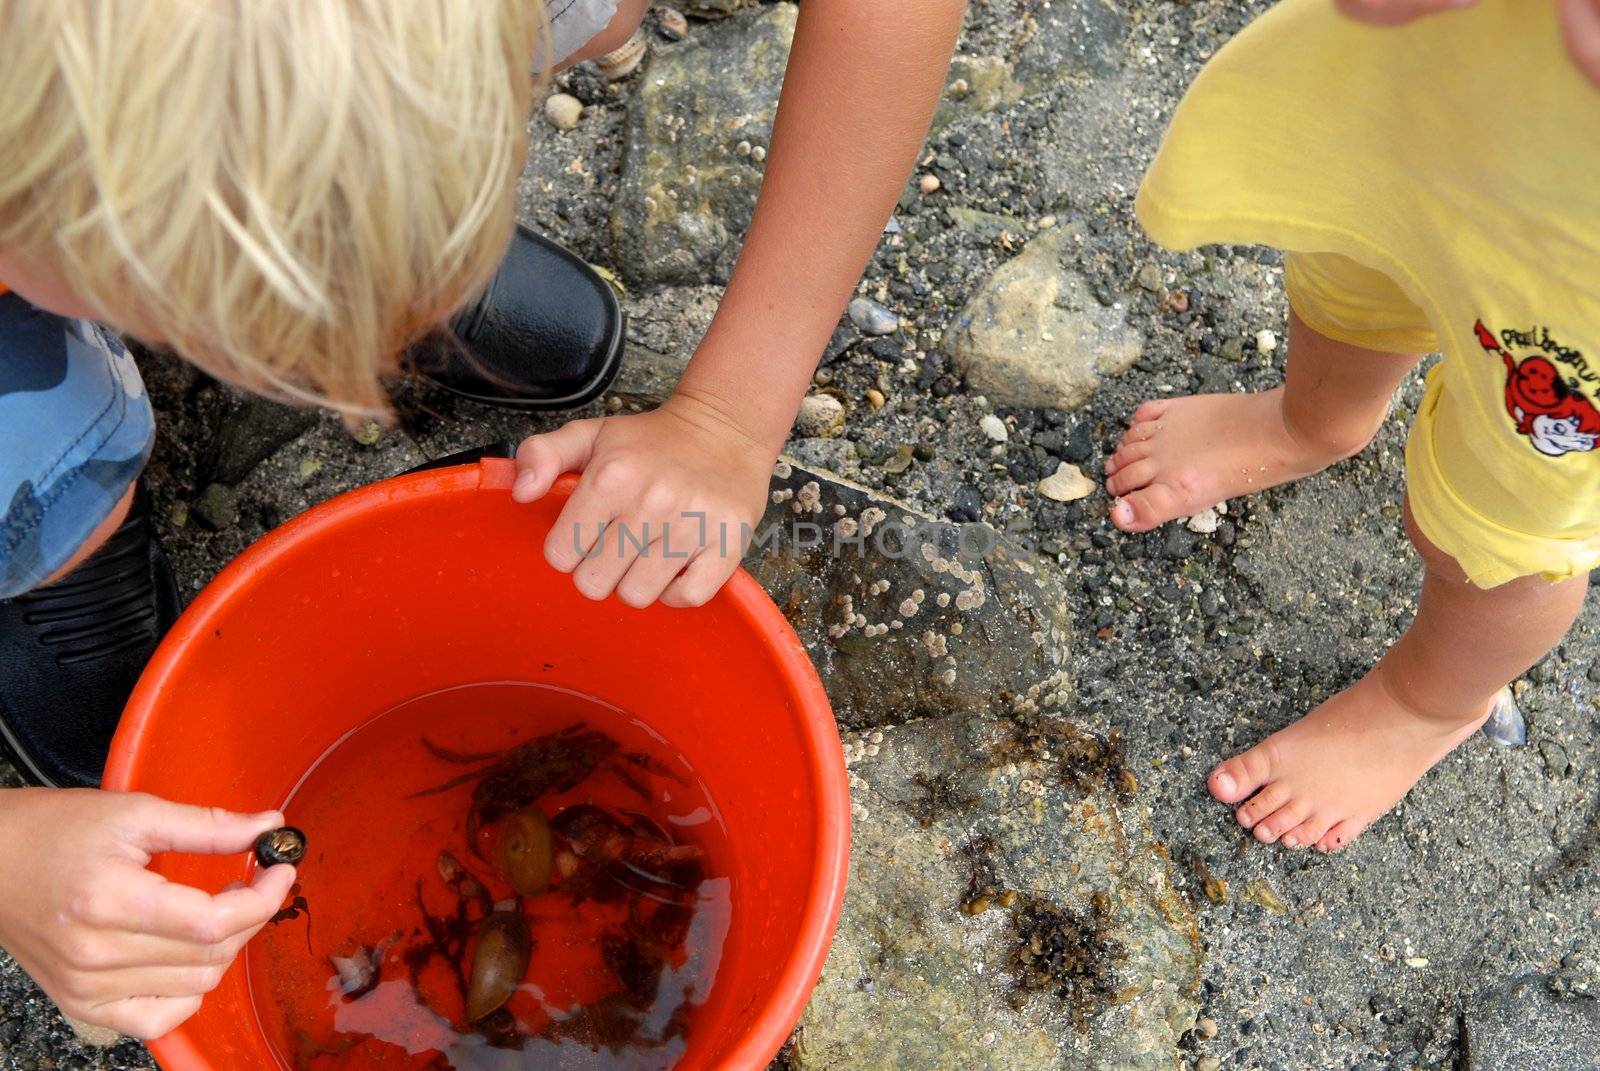 catching crabs. Please note: No negative use allowed.